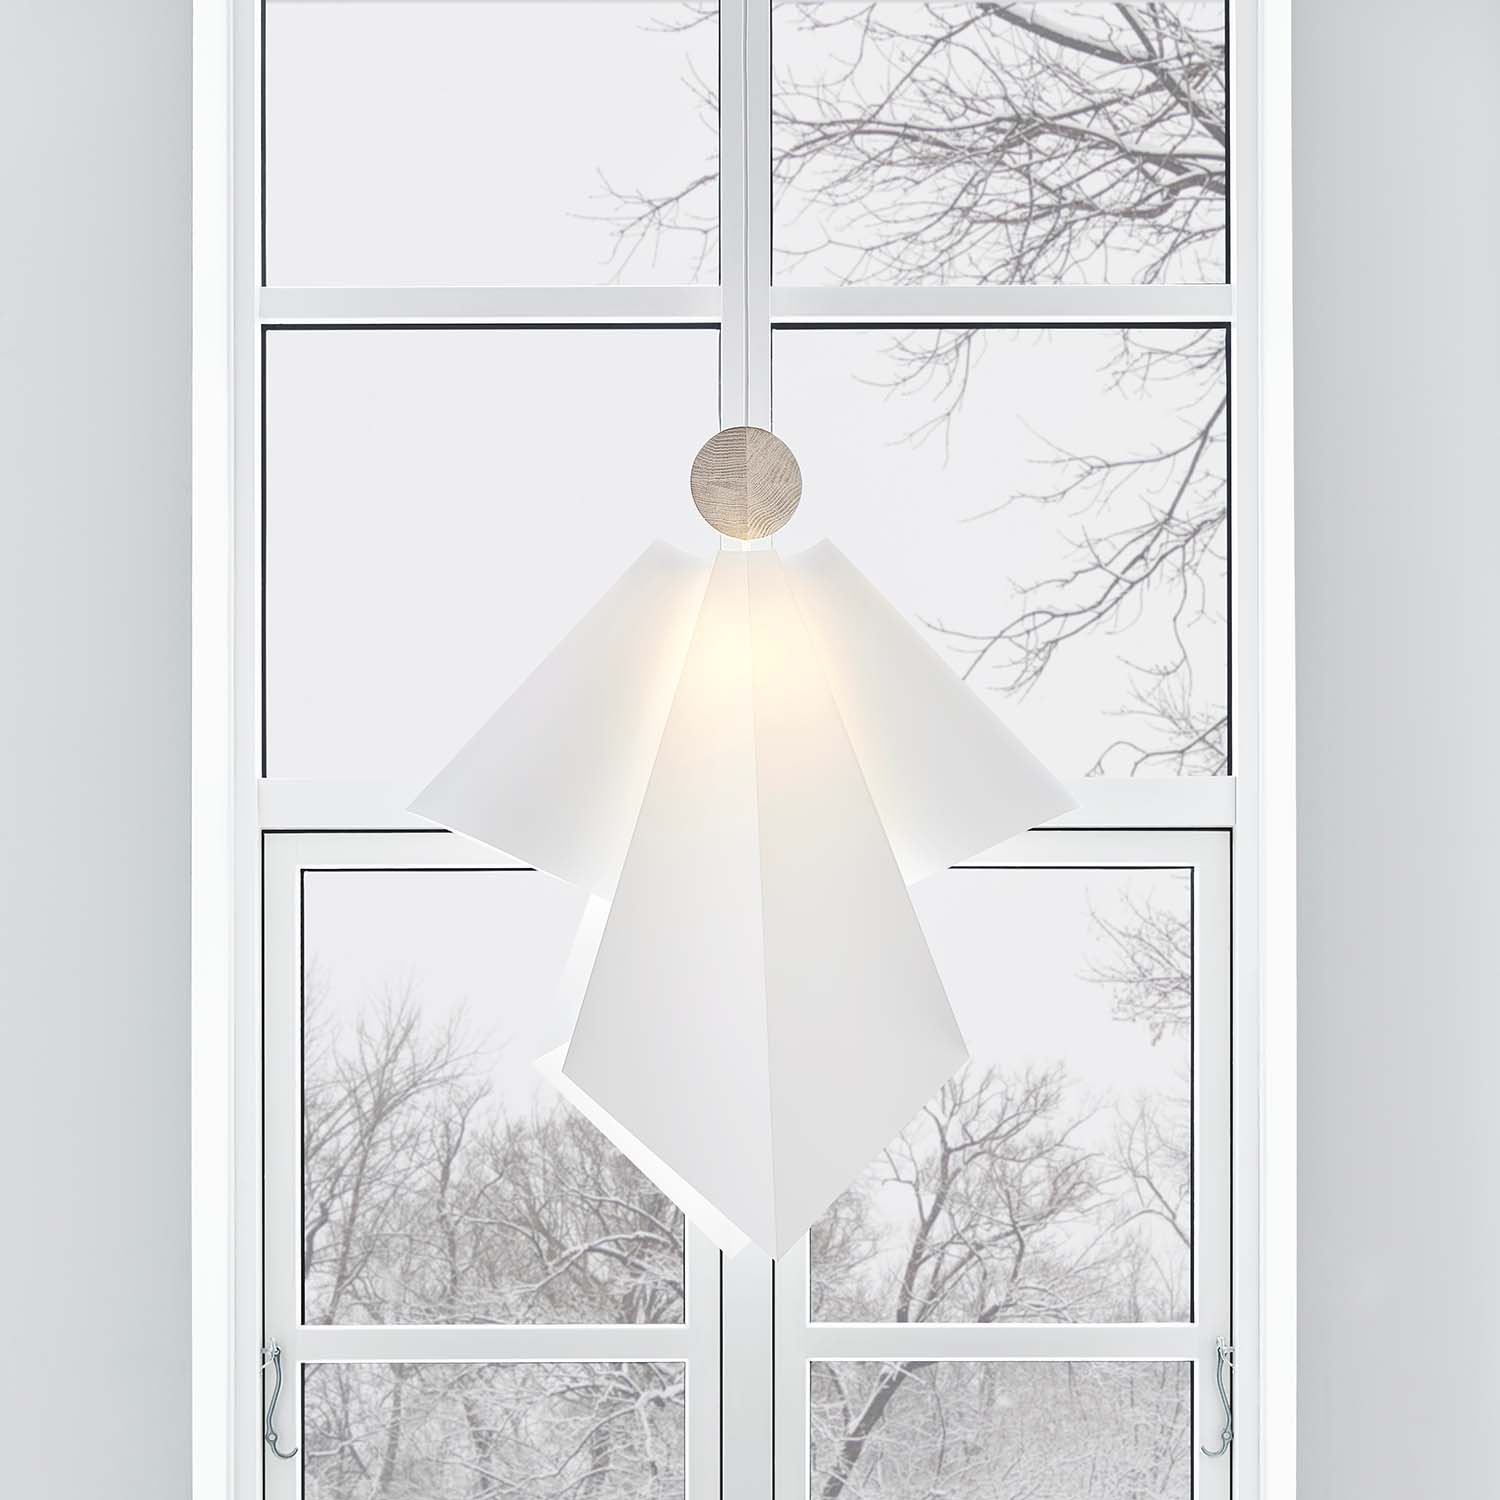 ANGELS GABRIEL - White acrylic pendant light in the shape of an angel